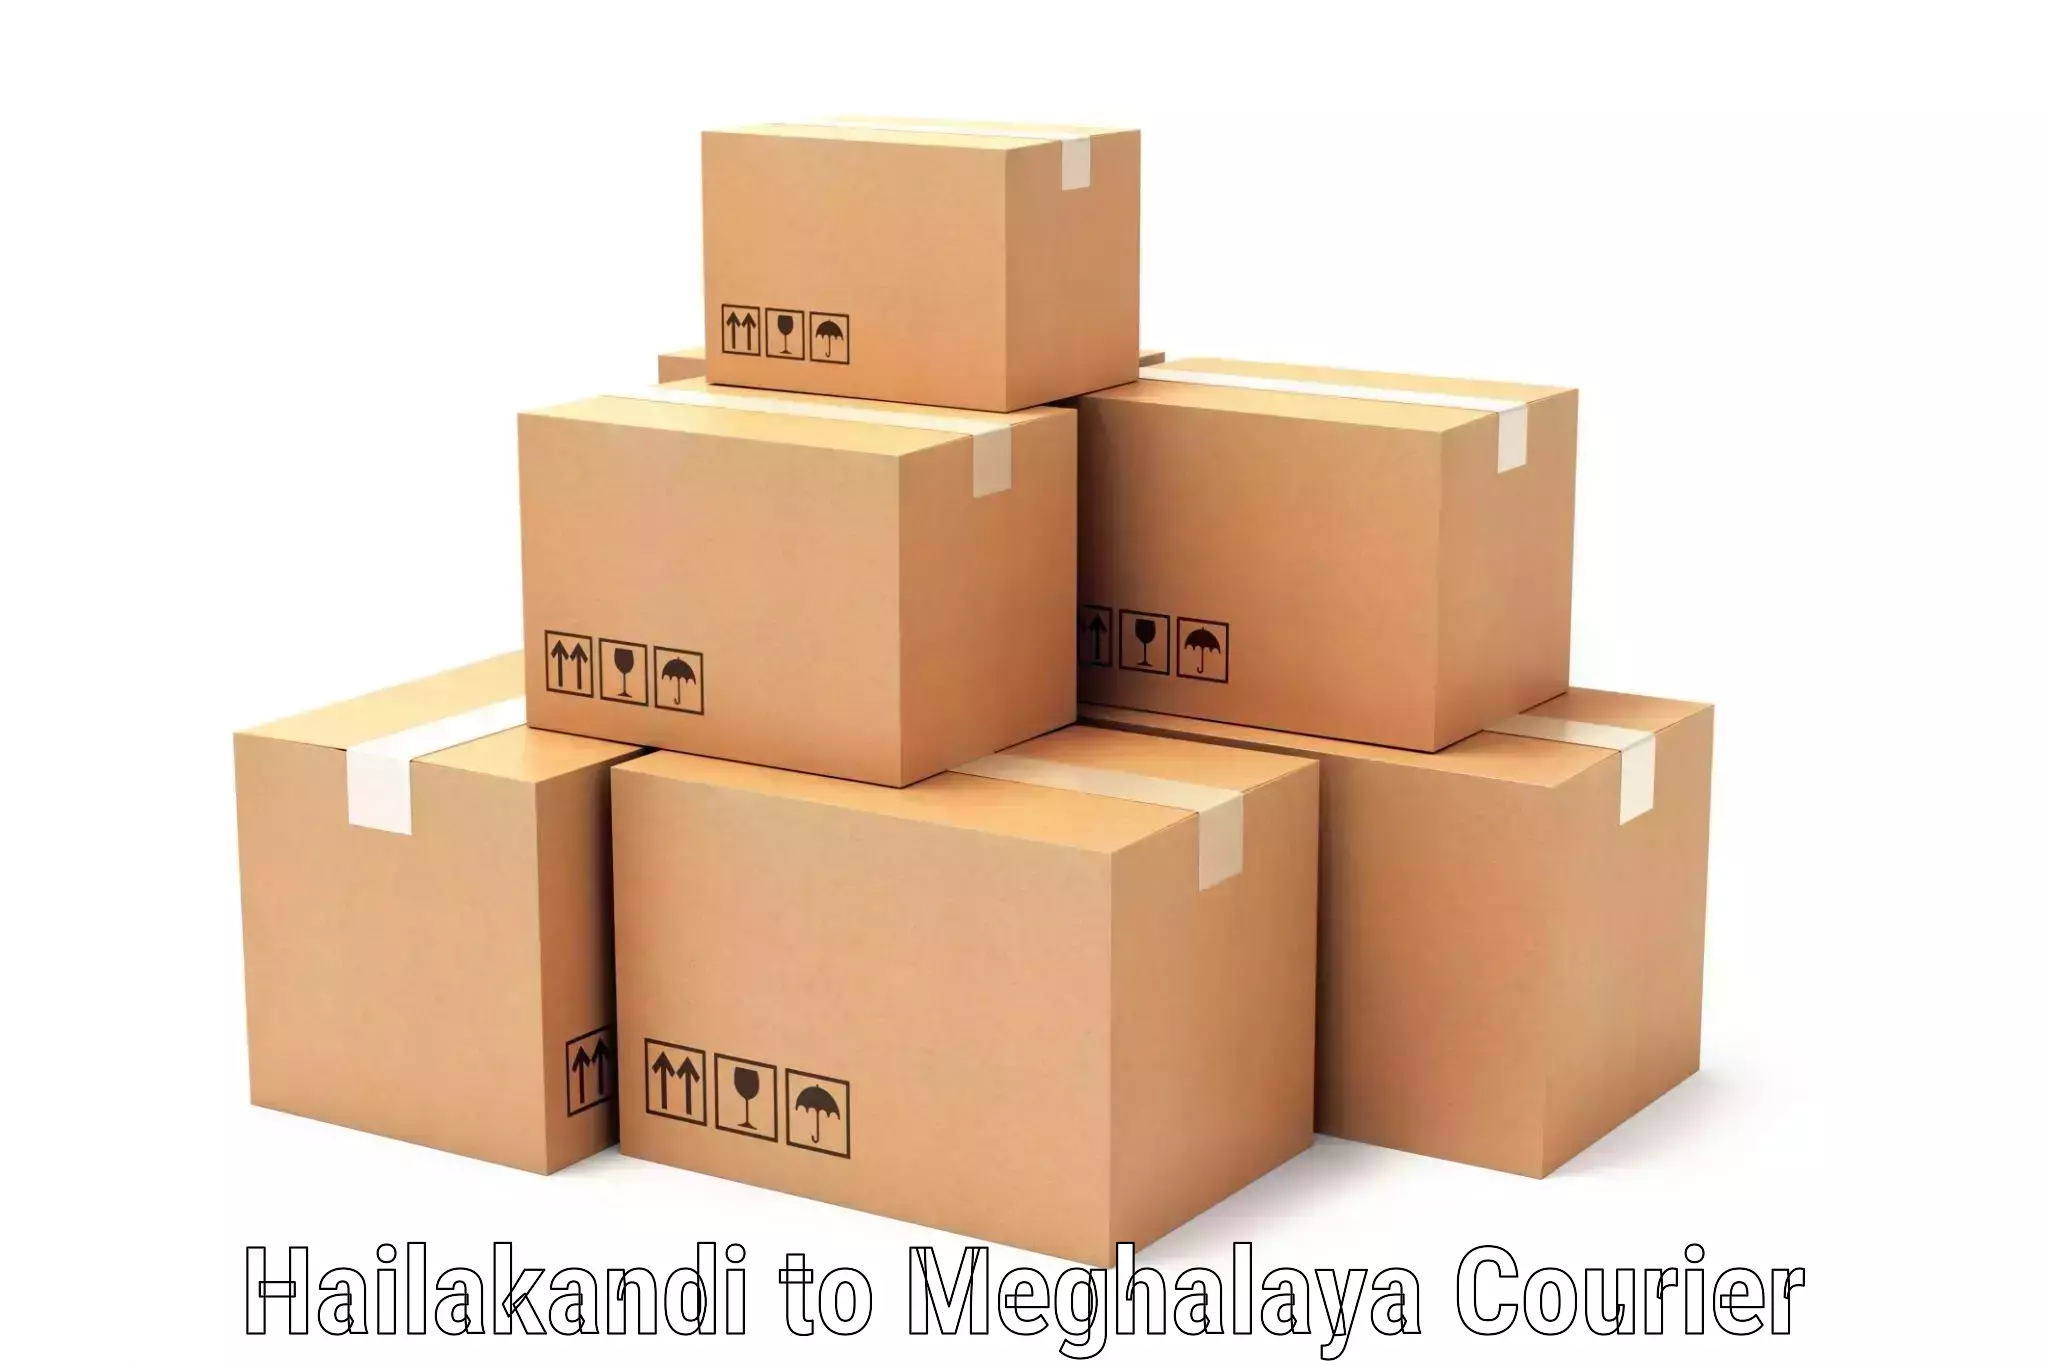 Small business couriers in Hailakandi to Shillong